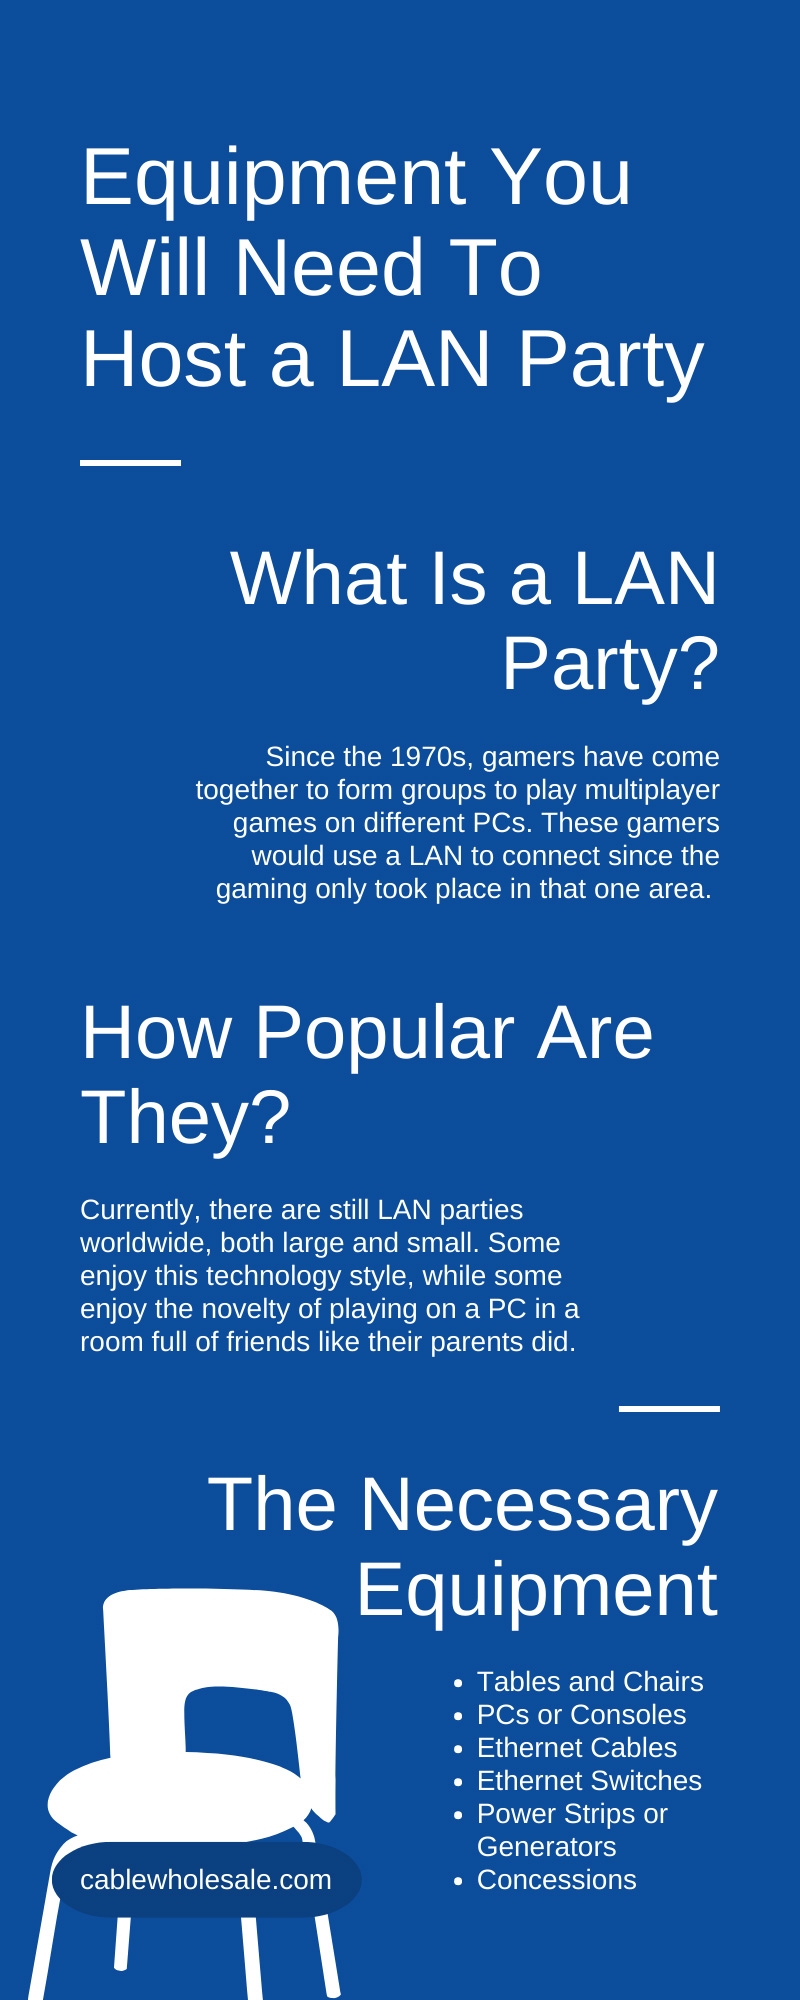 Equipment You Will Need To Host a LAN Party